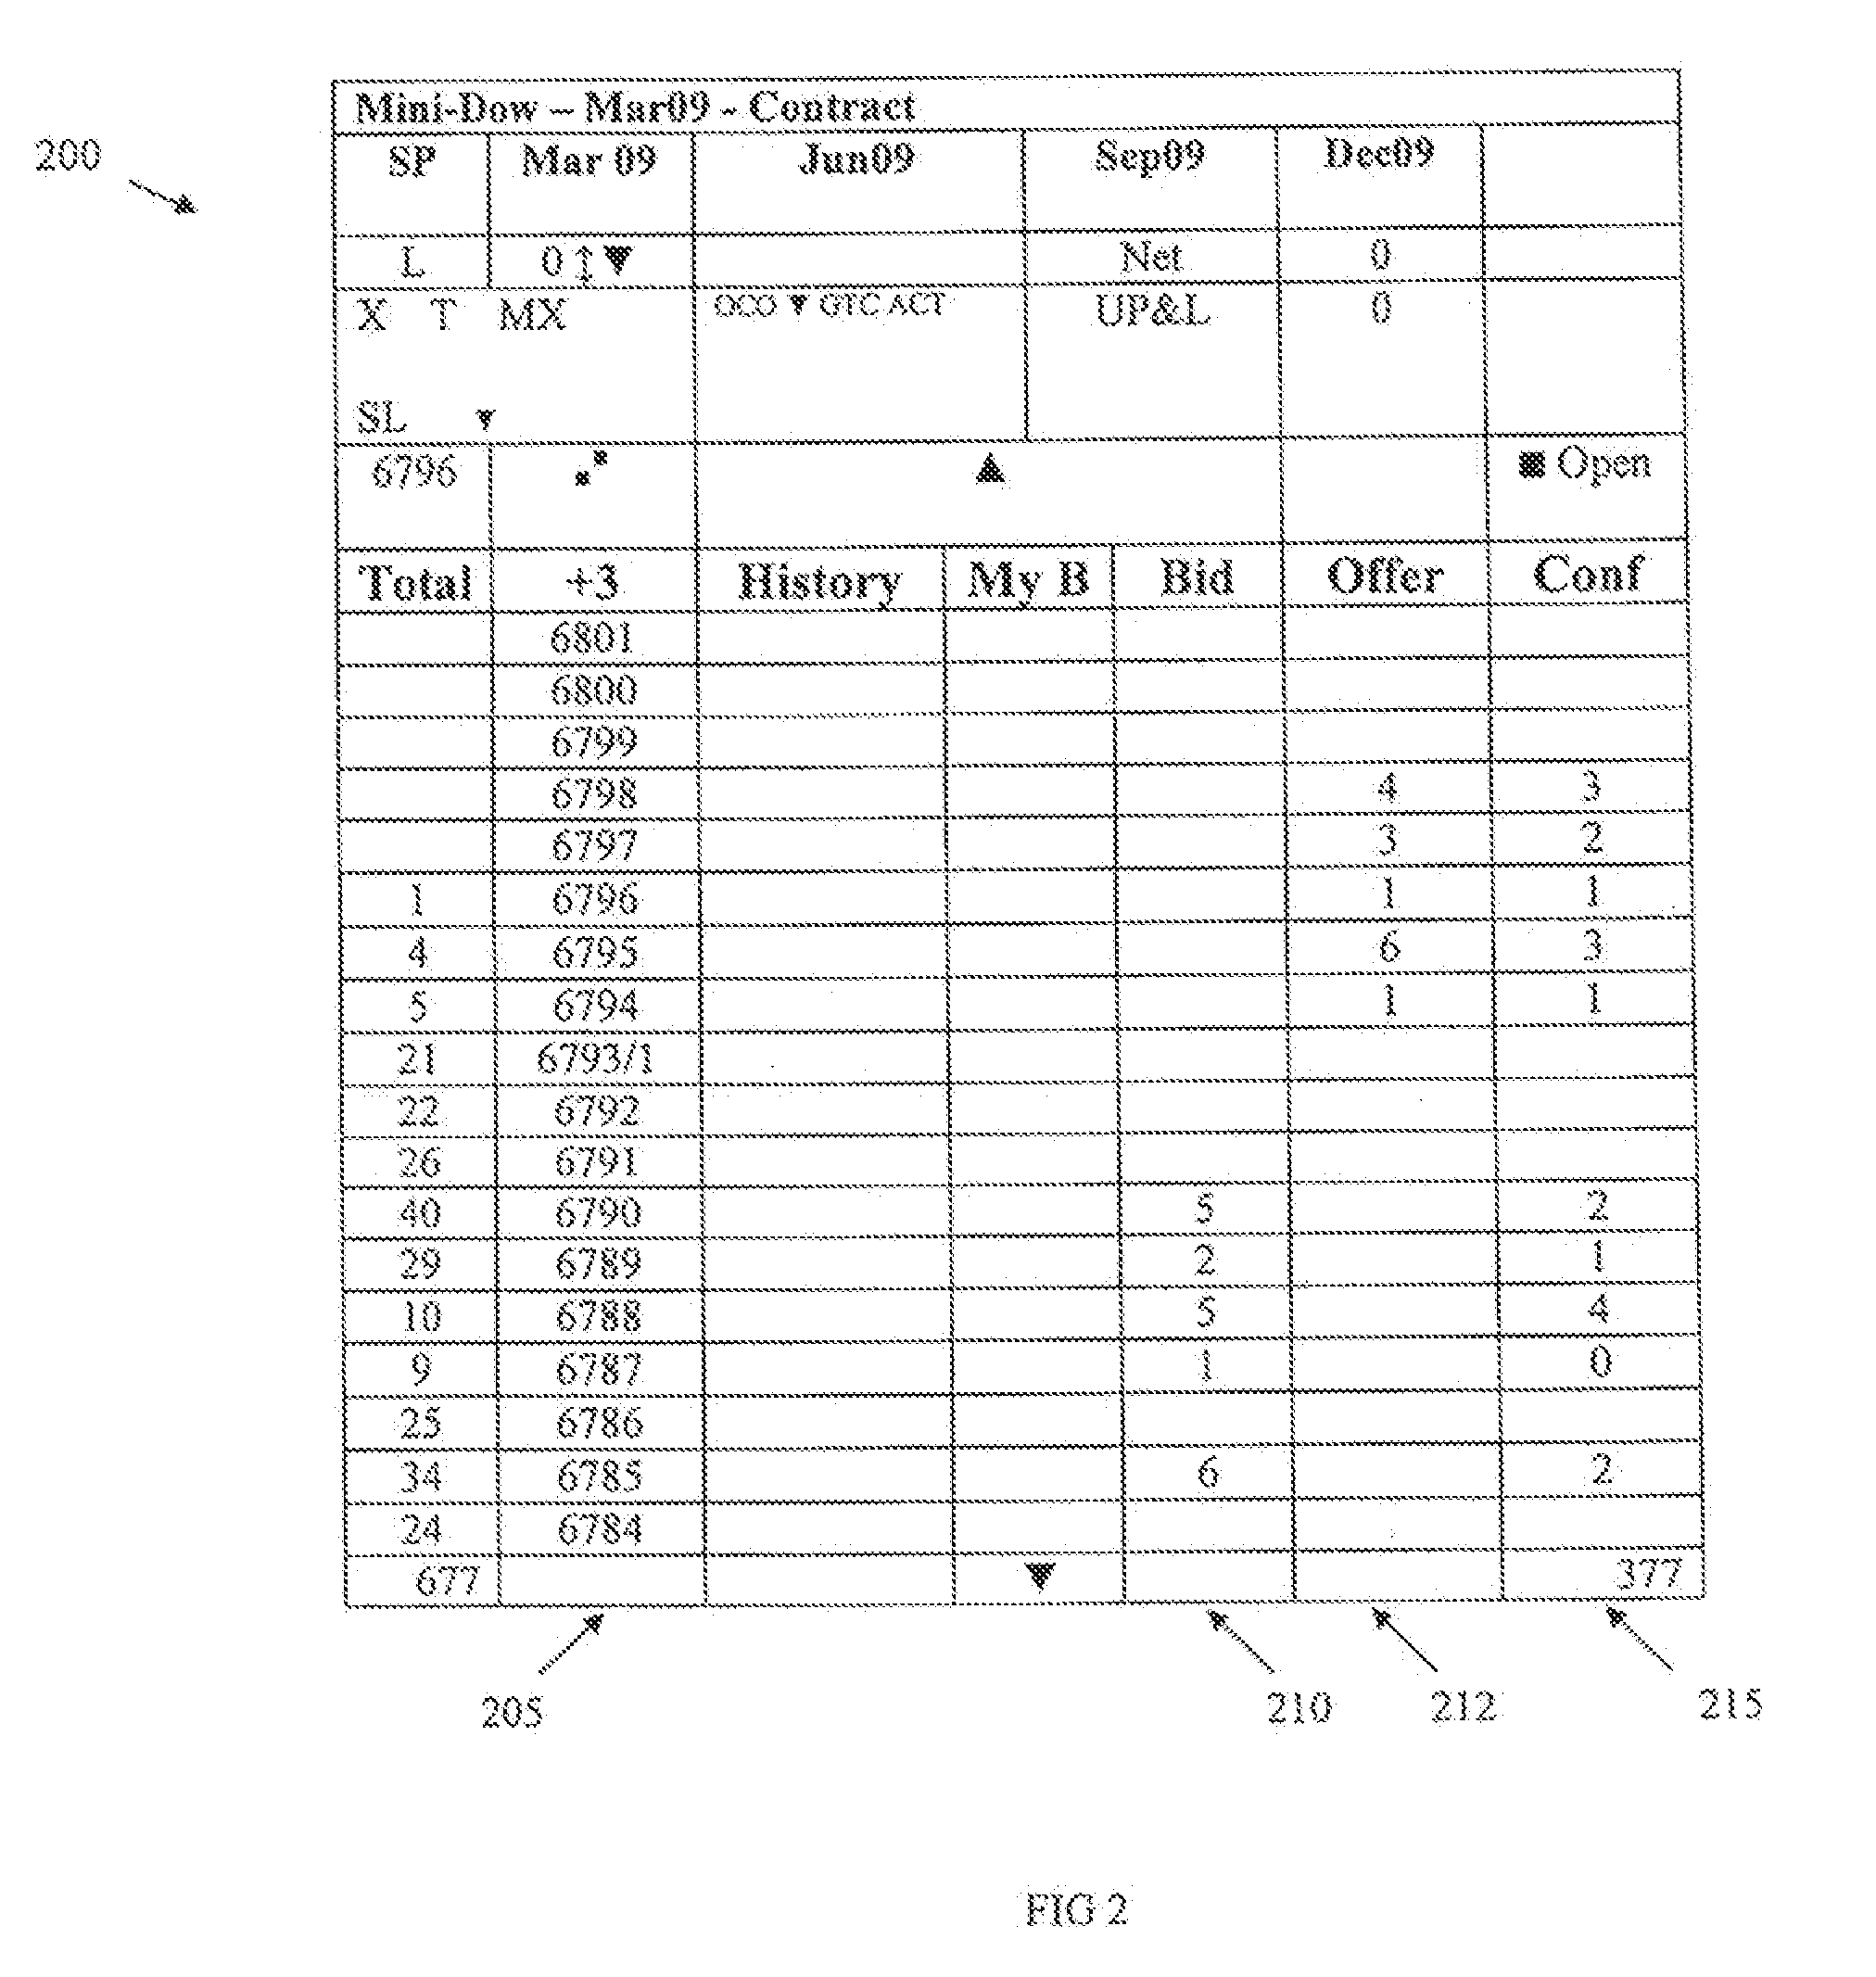 System and method for determining confidence levels for a market depth in a commodities market